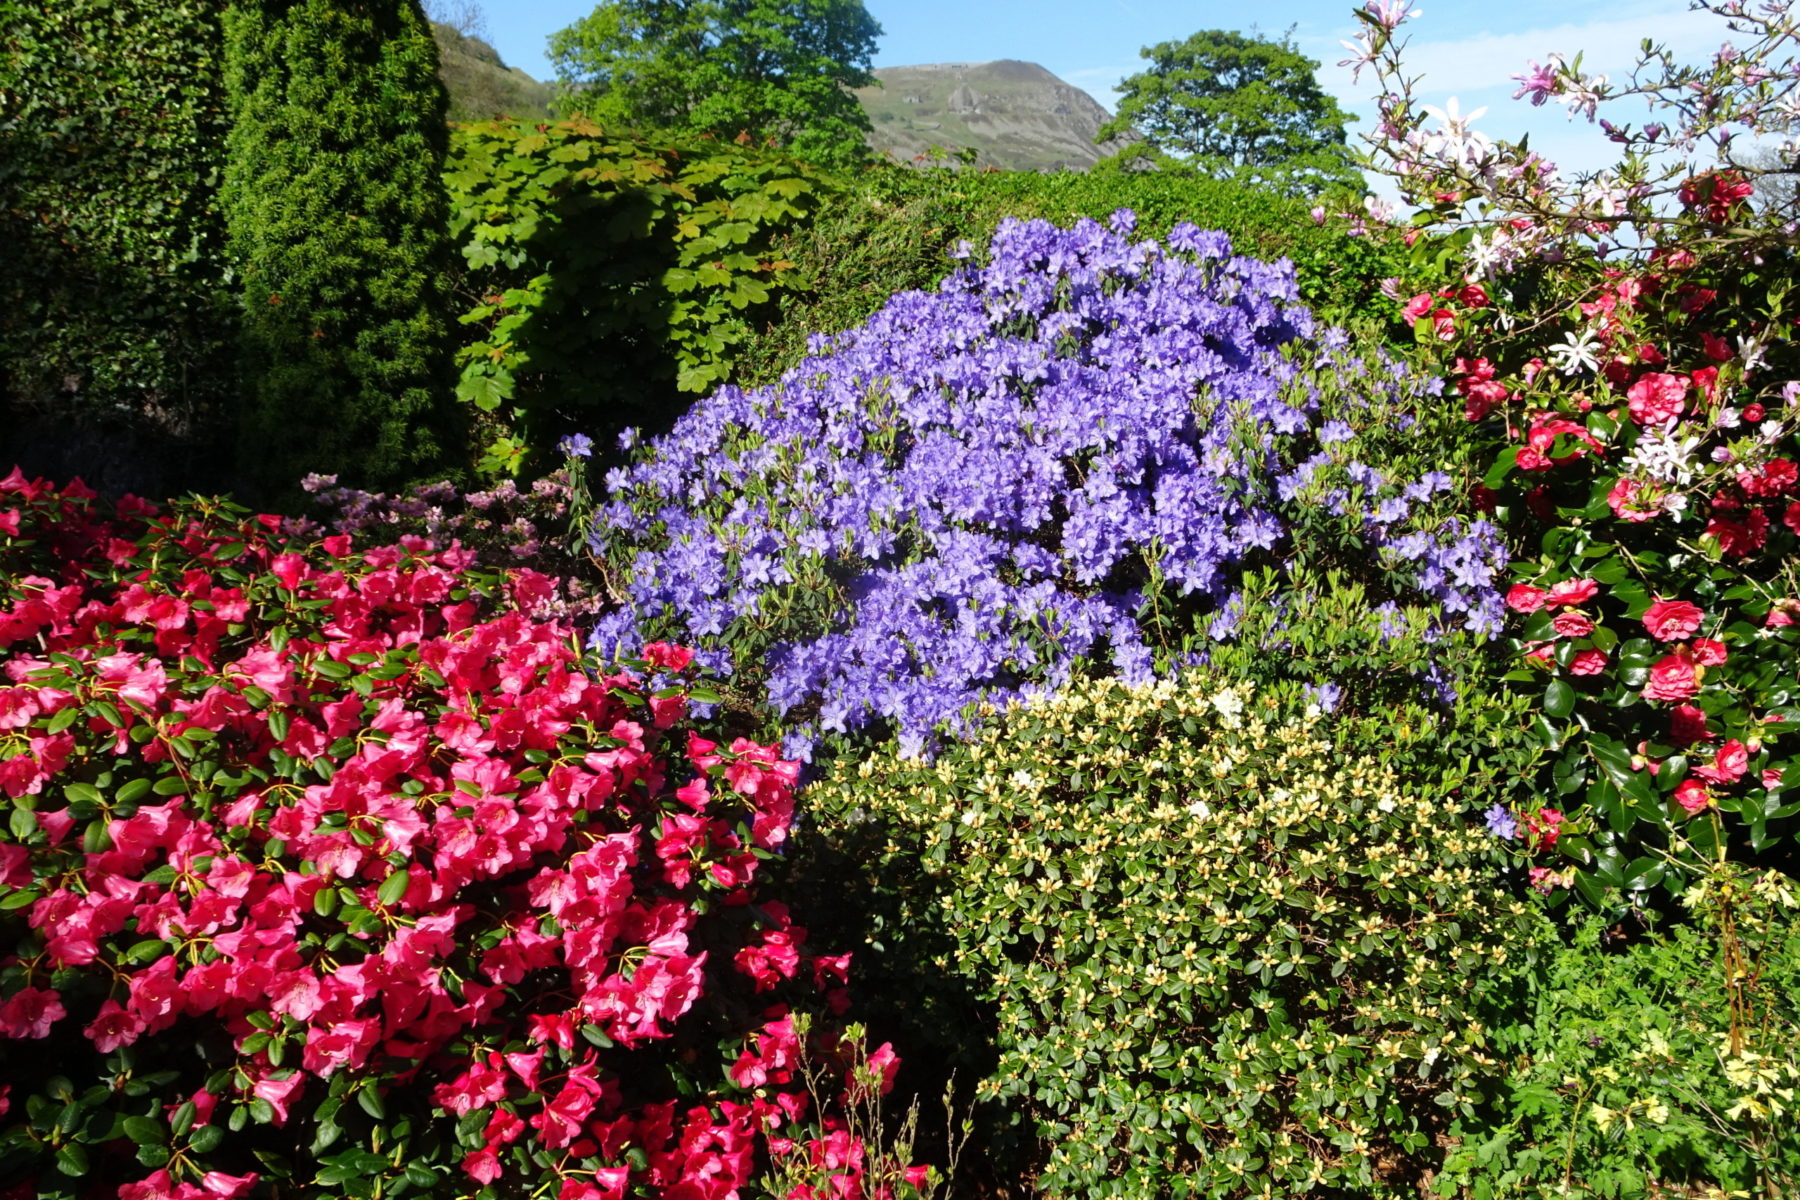 How to care for rhododendrons